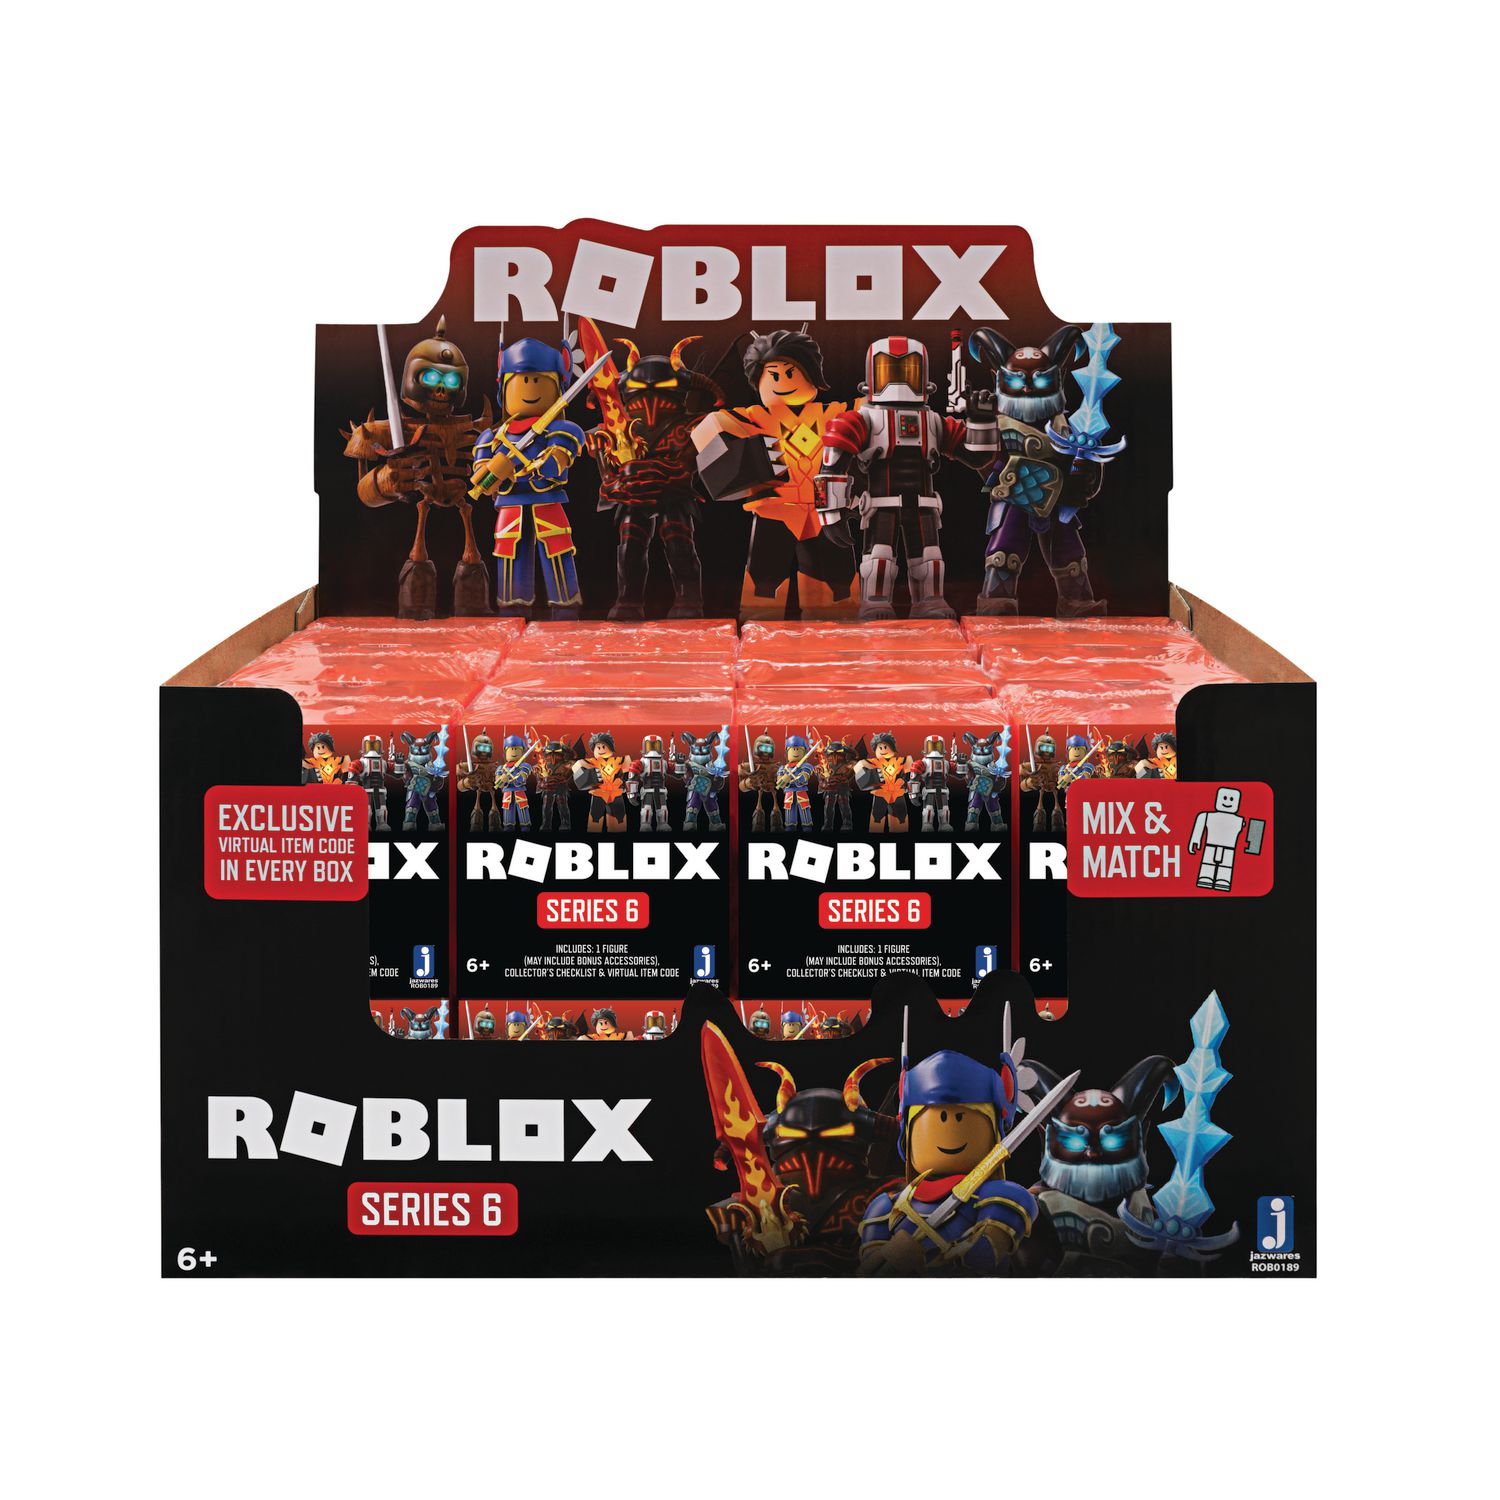 Tv Movie Video Games Jazwares With Virtual Item Captain Rampage New Roblox Series 1 Action Figure Toys Hobbies - toys hobbies tv movie video games find roblox